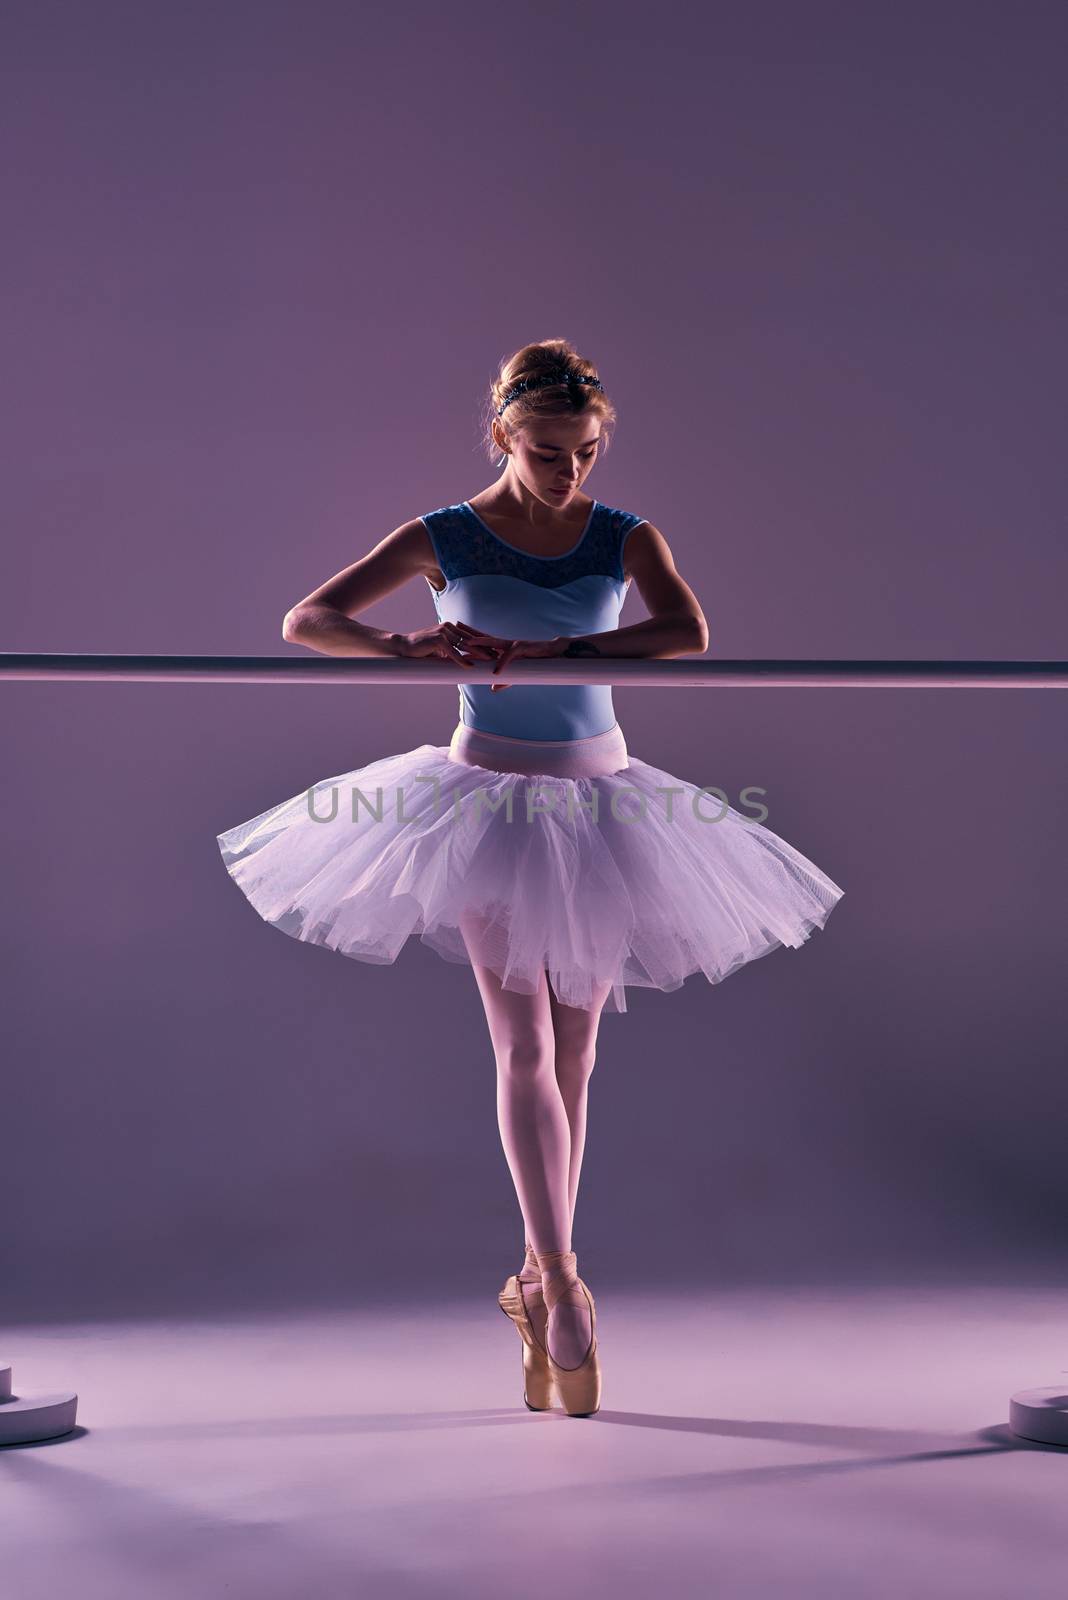 classic ballet dancer in white tutu at ballet barre on a lilac background